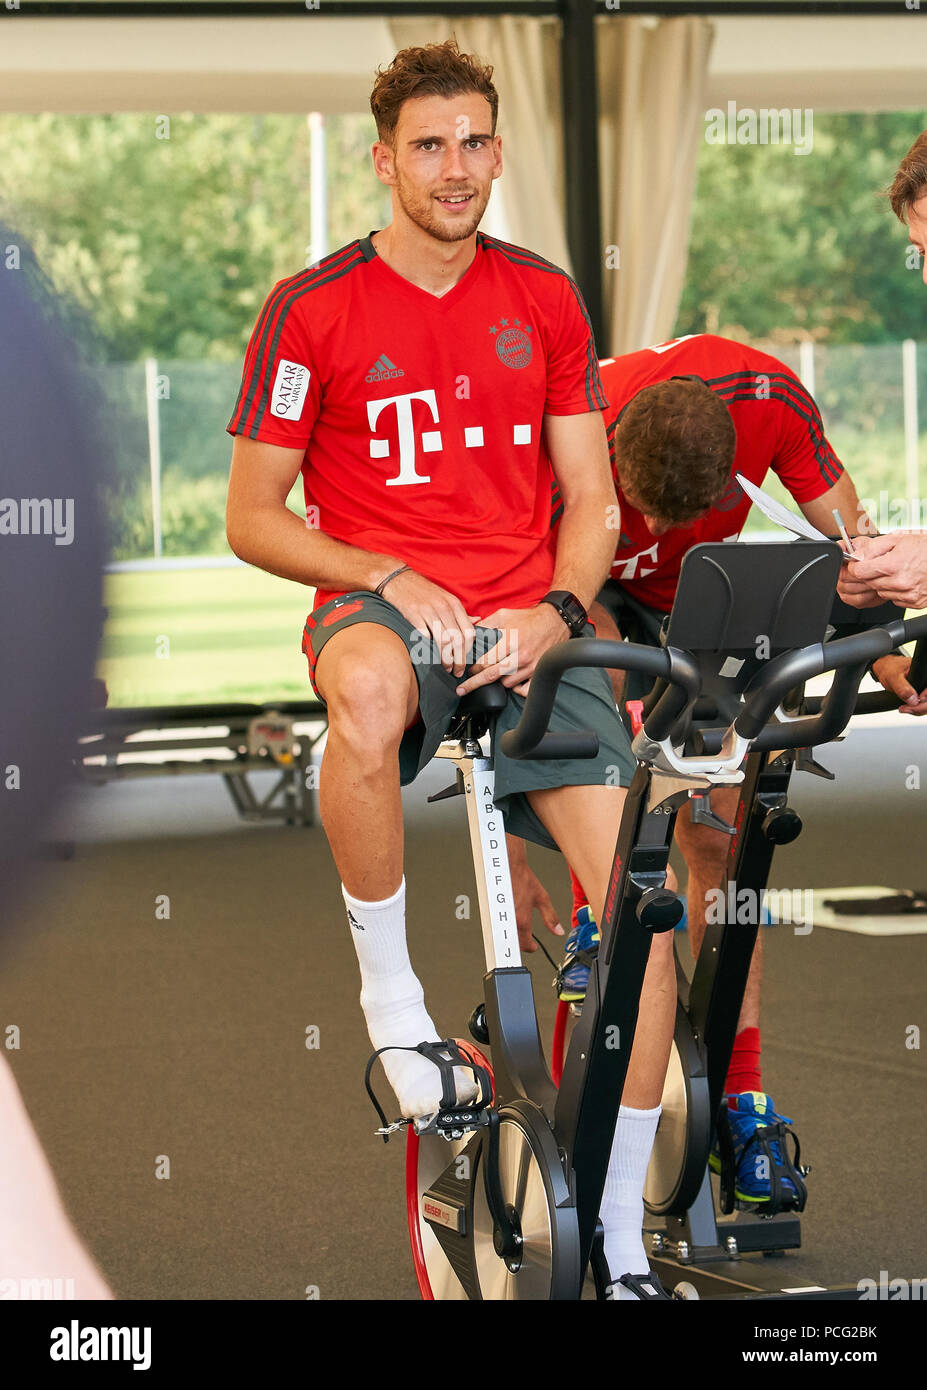 Rottach-Egern, Tegernsee, Germany. 2nd Aug 2018. FC Bayern Munich,  Rottach-Egern, August 02, 2018 Leon GORETZKA, FCB 18 on the cycle ergometer  in the trainings camp for preparation Season 2018/2019, August 2, 2018